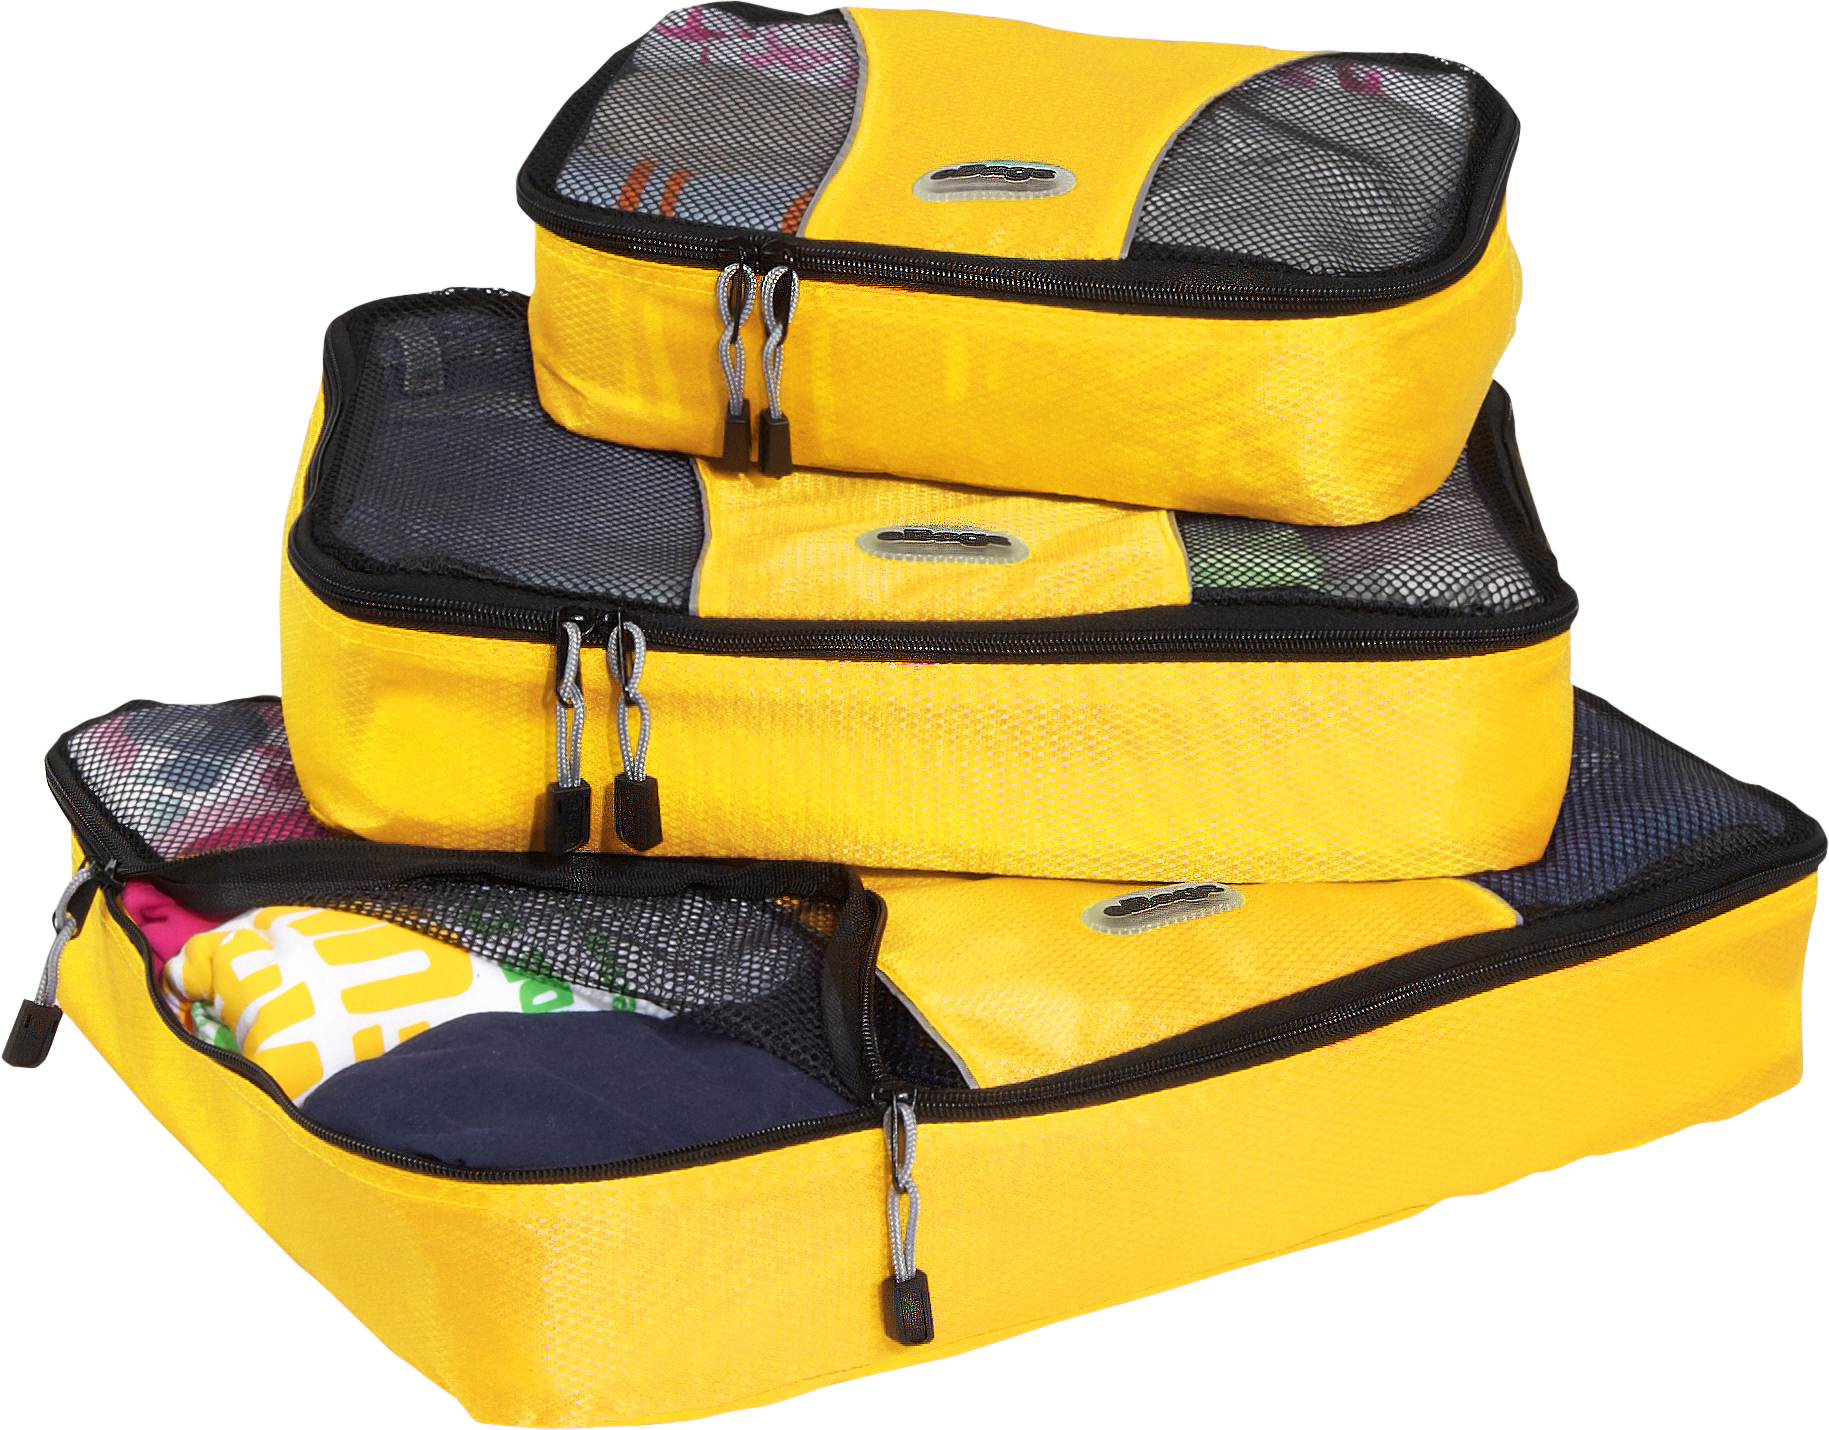 eBags Packing Cubes (yellow - set of 3)